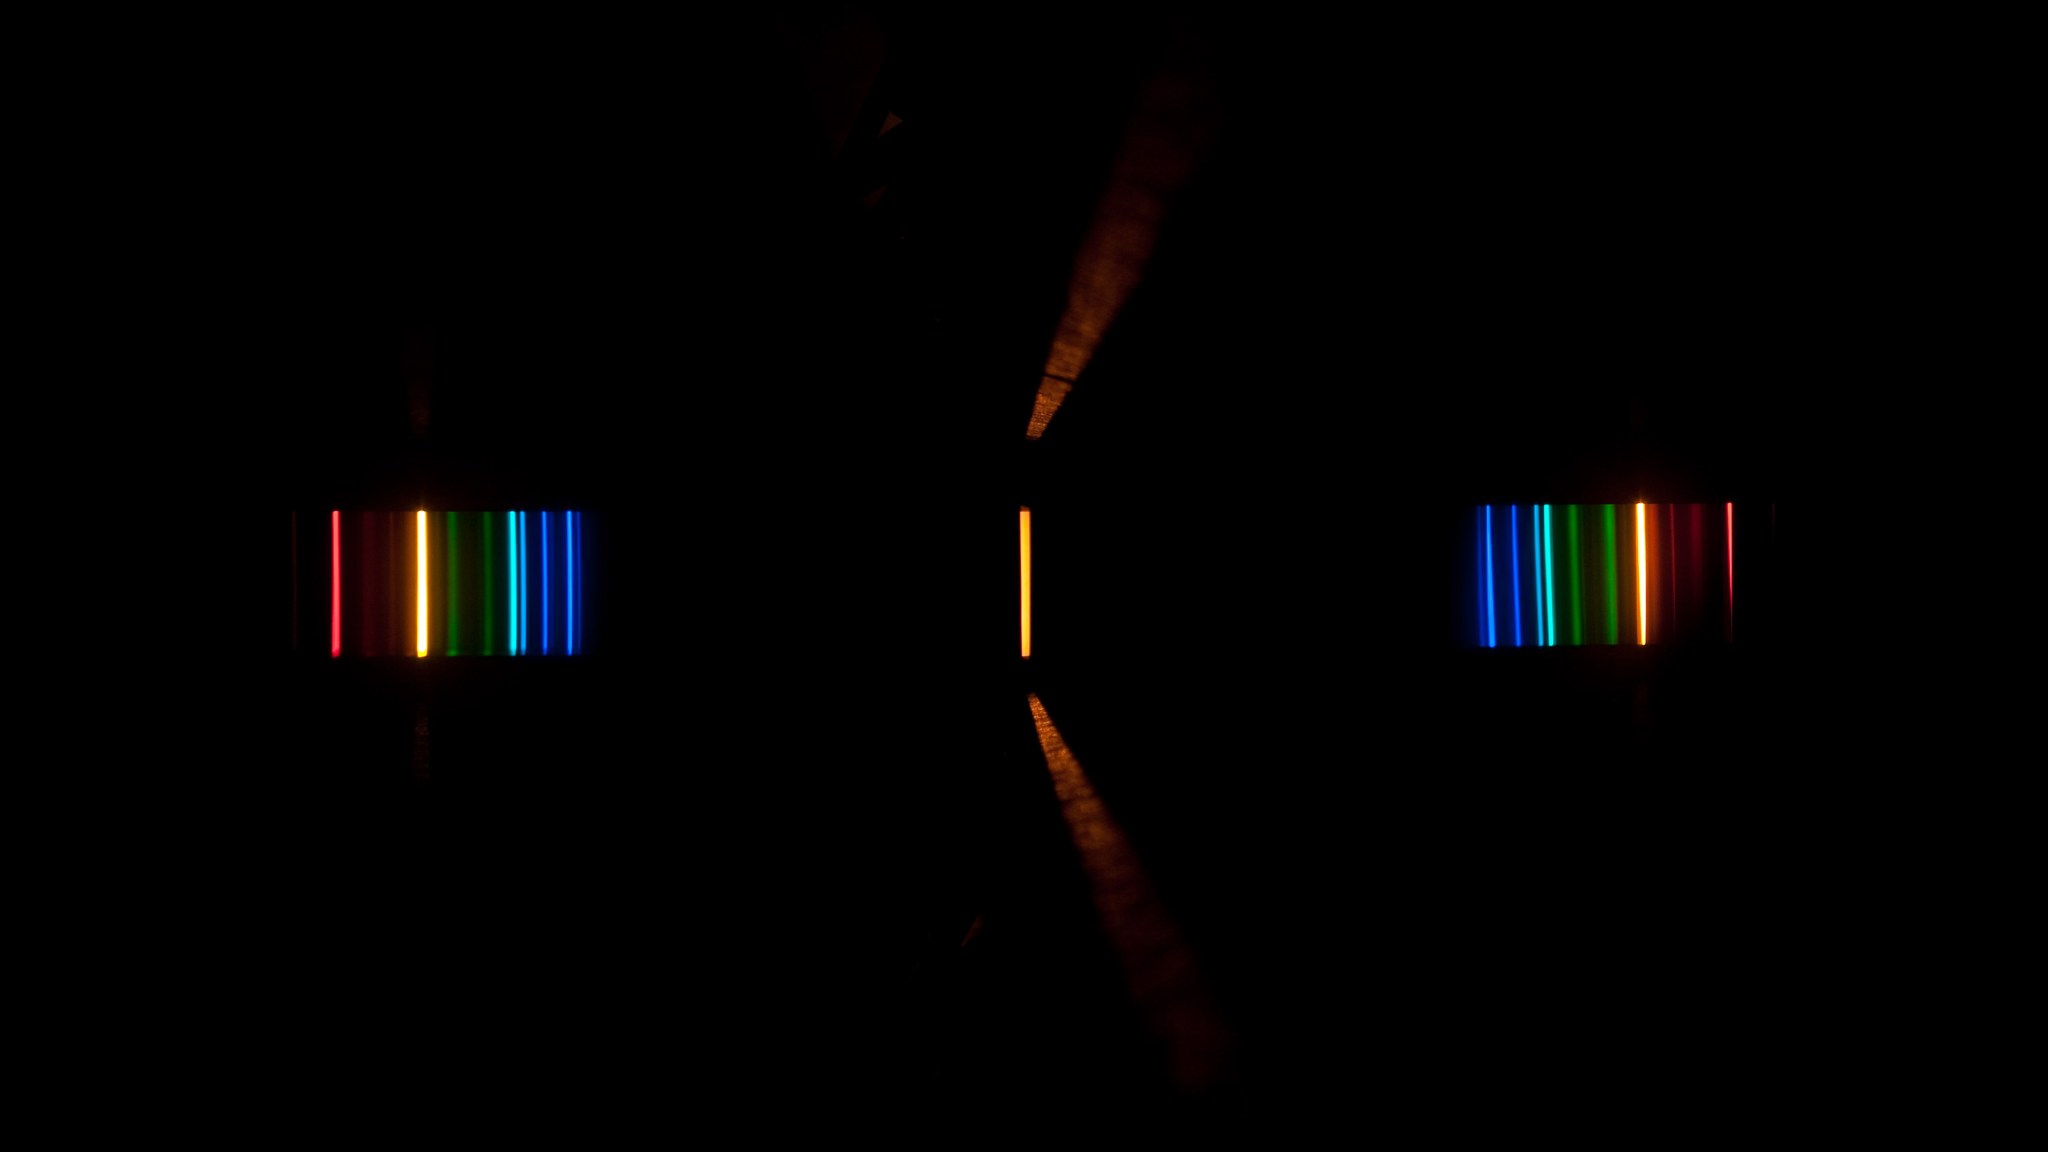 Central light beam and a rainbow series of beams to its left and right against a black background.